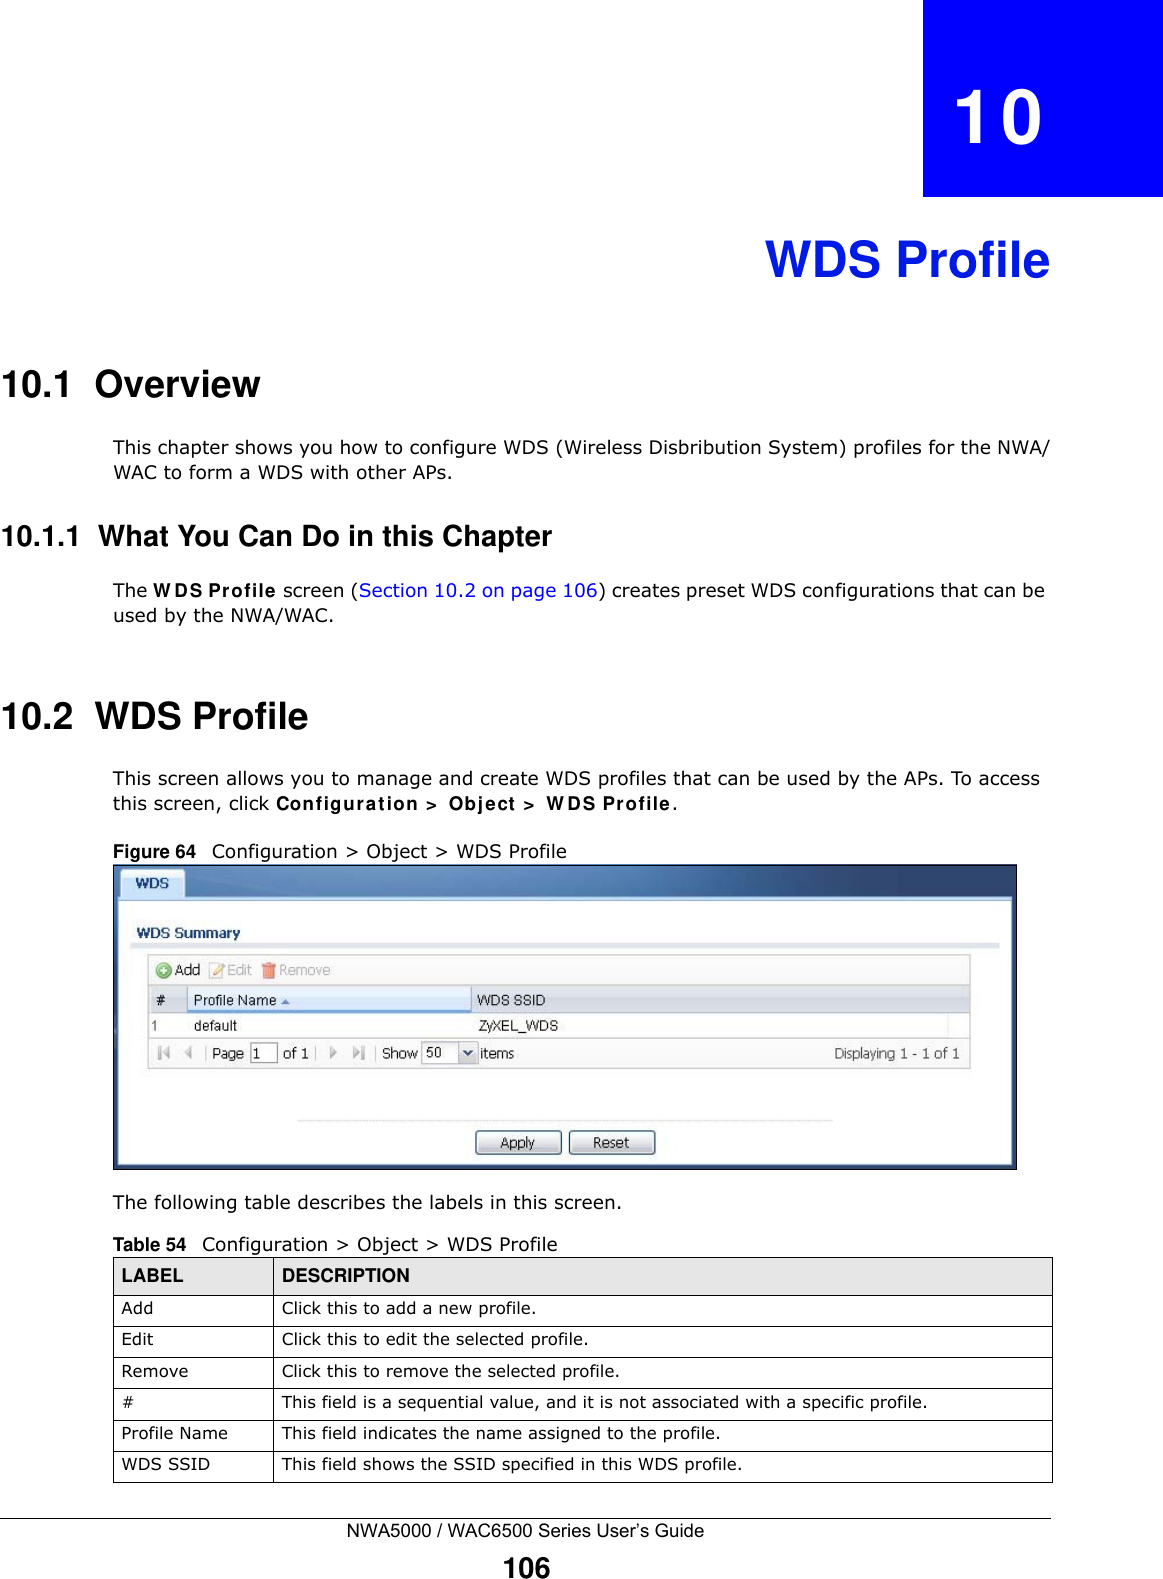 NWA5000 / WAC6500 Series User’s Guide106CHAPTER   10WDS Profile10.1  OverviewThis chapter shows you how to configure WDS (Wireless Disbribution System) profiles for the NWA/WAC to form a WDS with other APs.10.1.1  What You Can Do in this ChapterThe W DS Profile screen (Section 10.2 on page 106) creates preset WDS configurations that can be used by the NWA/WAC.10.2  WDS Profile This screen allows you to manage and create WDS profiles that can be used by the APs. To access this screen, click Configurat ion  &gt;  Object  &gt;  W DS Profile.Figure 64   Configuration &gt; Object &gt; WDS ProfileThe following table describes the labels in this screen.  Table 54   Configuration &gt; Object &gt; WDS ProfileLABEL DESCRIPTIONAdd Click this to add a new profile.Edit Click this to edit the selected profile.Remove Click this to remove the selected profile.# This field is a sequential value, and it is not associated with a specific profile.Profile Name This field indicates the name assigned to the profile.WDS SSID This field shows the SSID specified in this WDS profile.